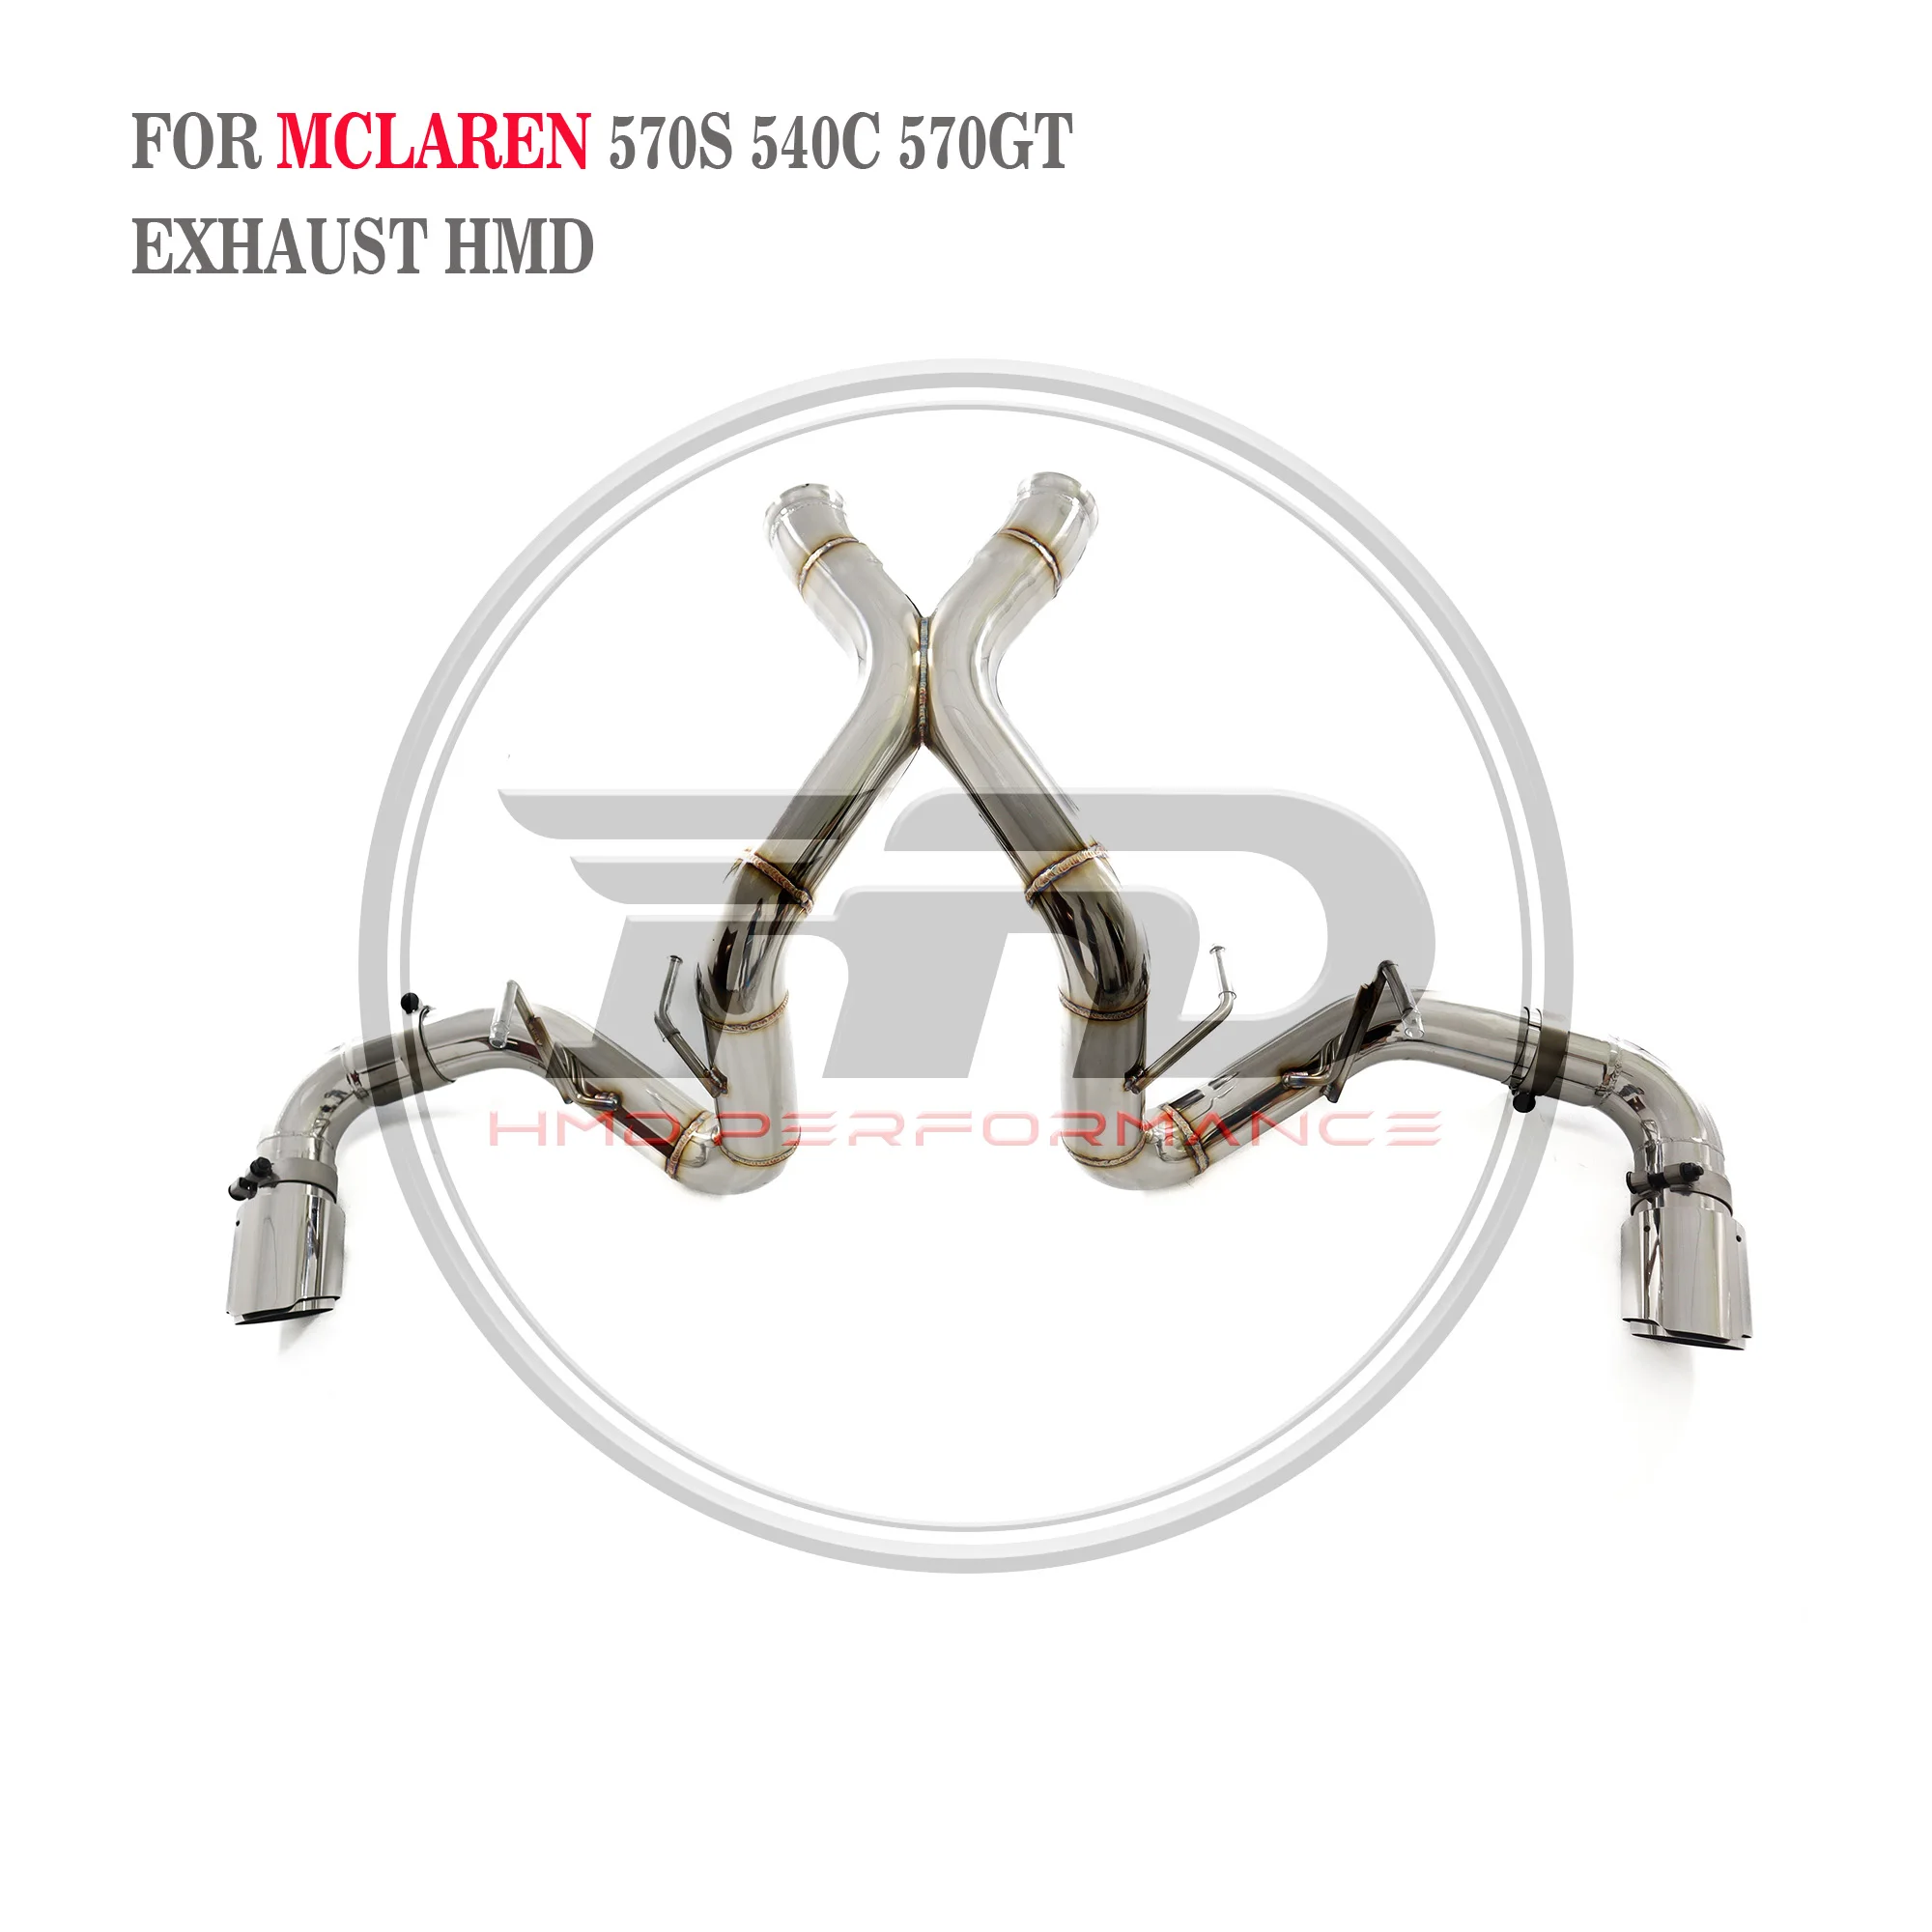 

HMD Stainless Steel Exhaust System Performance Catback for McLaren 540C 570S 570GT 3" X Pipe Without Valve